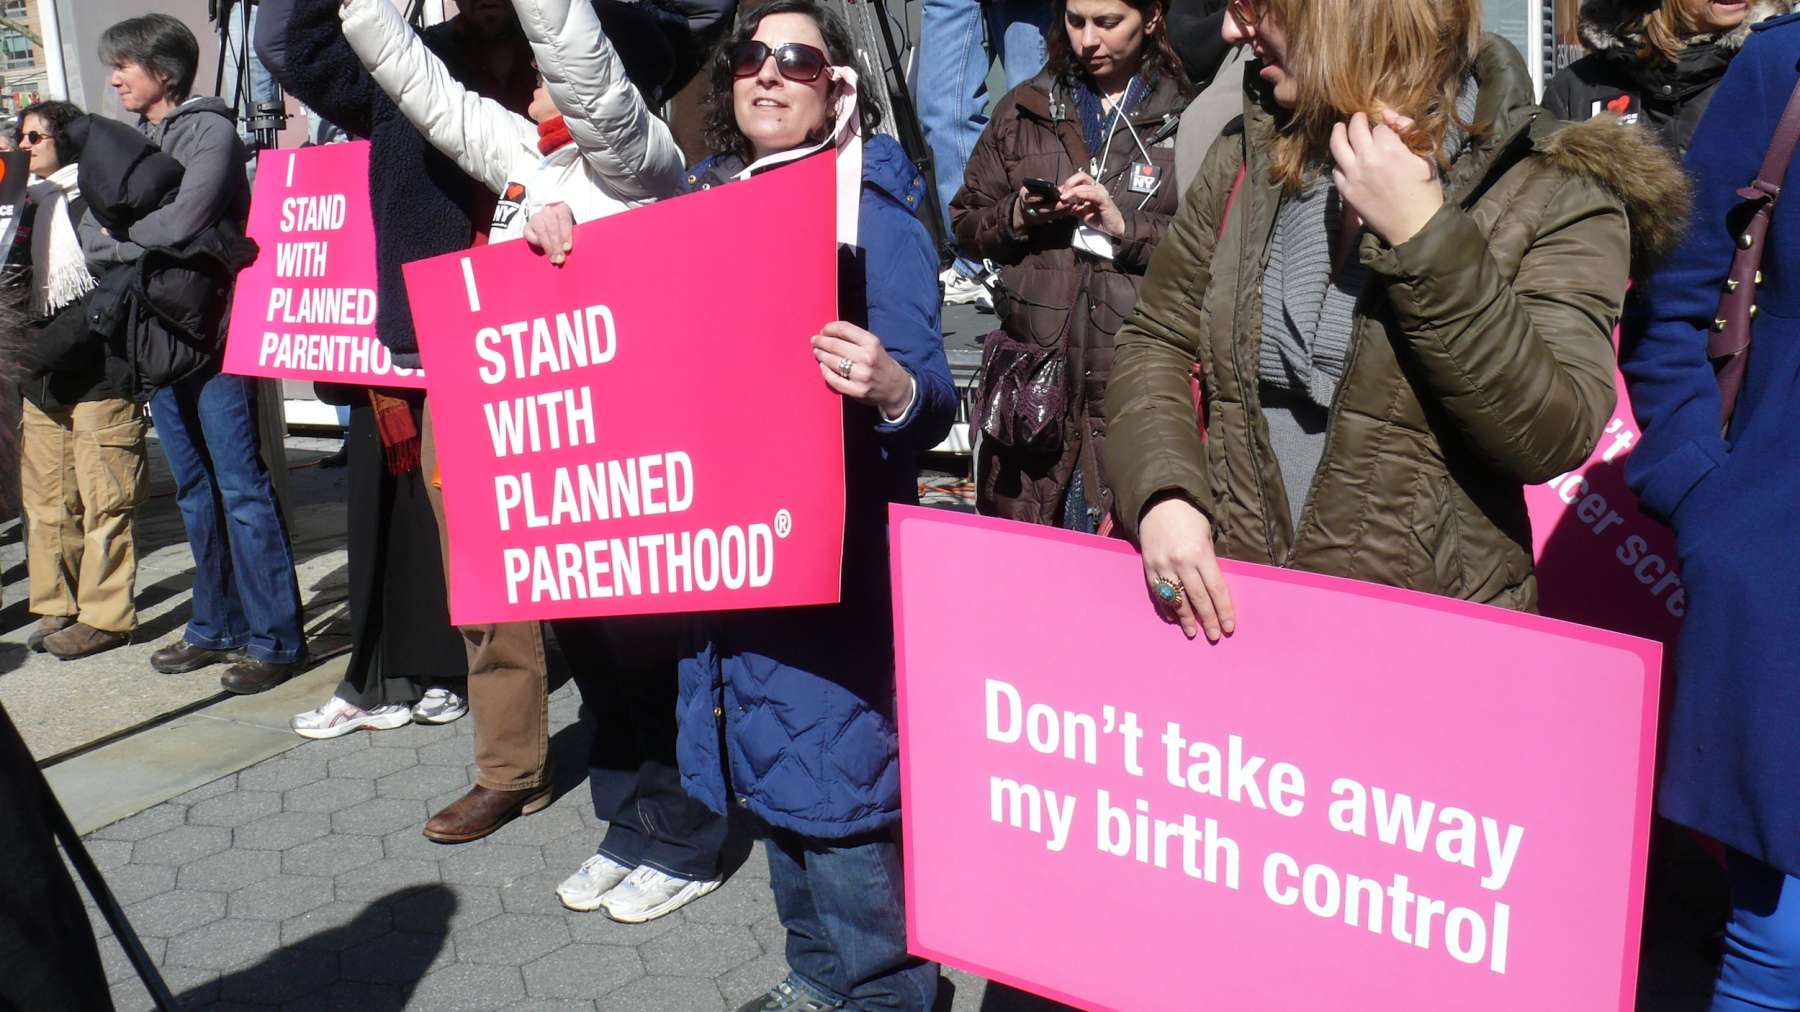 Rhode Island voters prove that sexual reproductive health and rights are winning issues